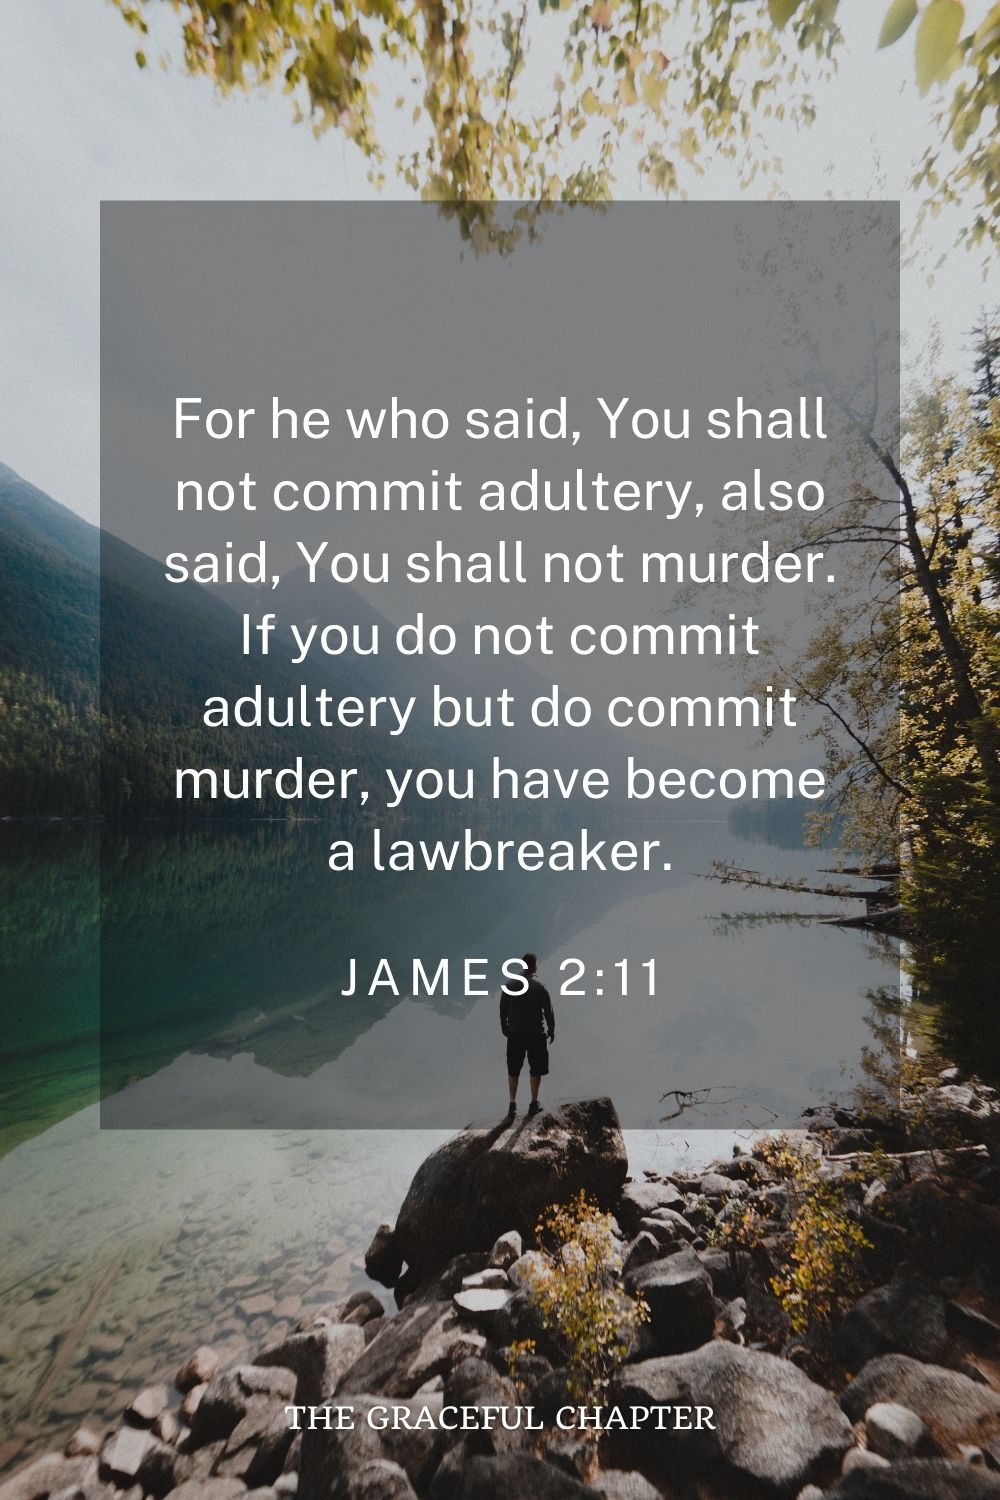 For he who said, “You shall not commit adultery, also said, “You shall not murder. If you do not commit adultery but do commit murder, you have become a lawbreaker. James 2:11